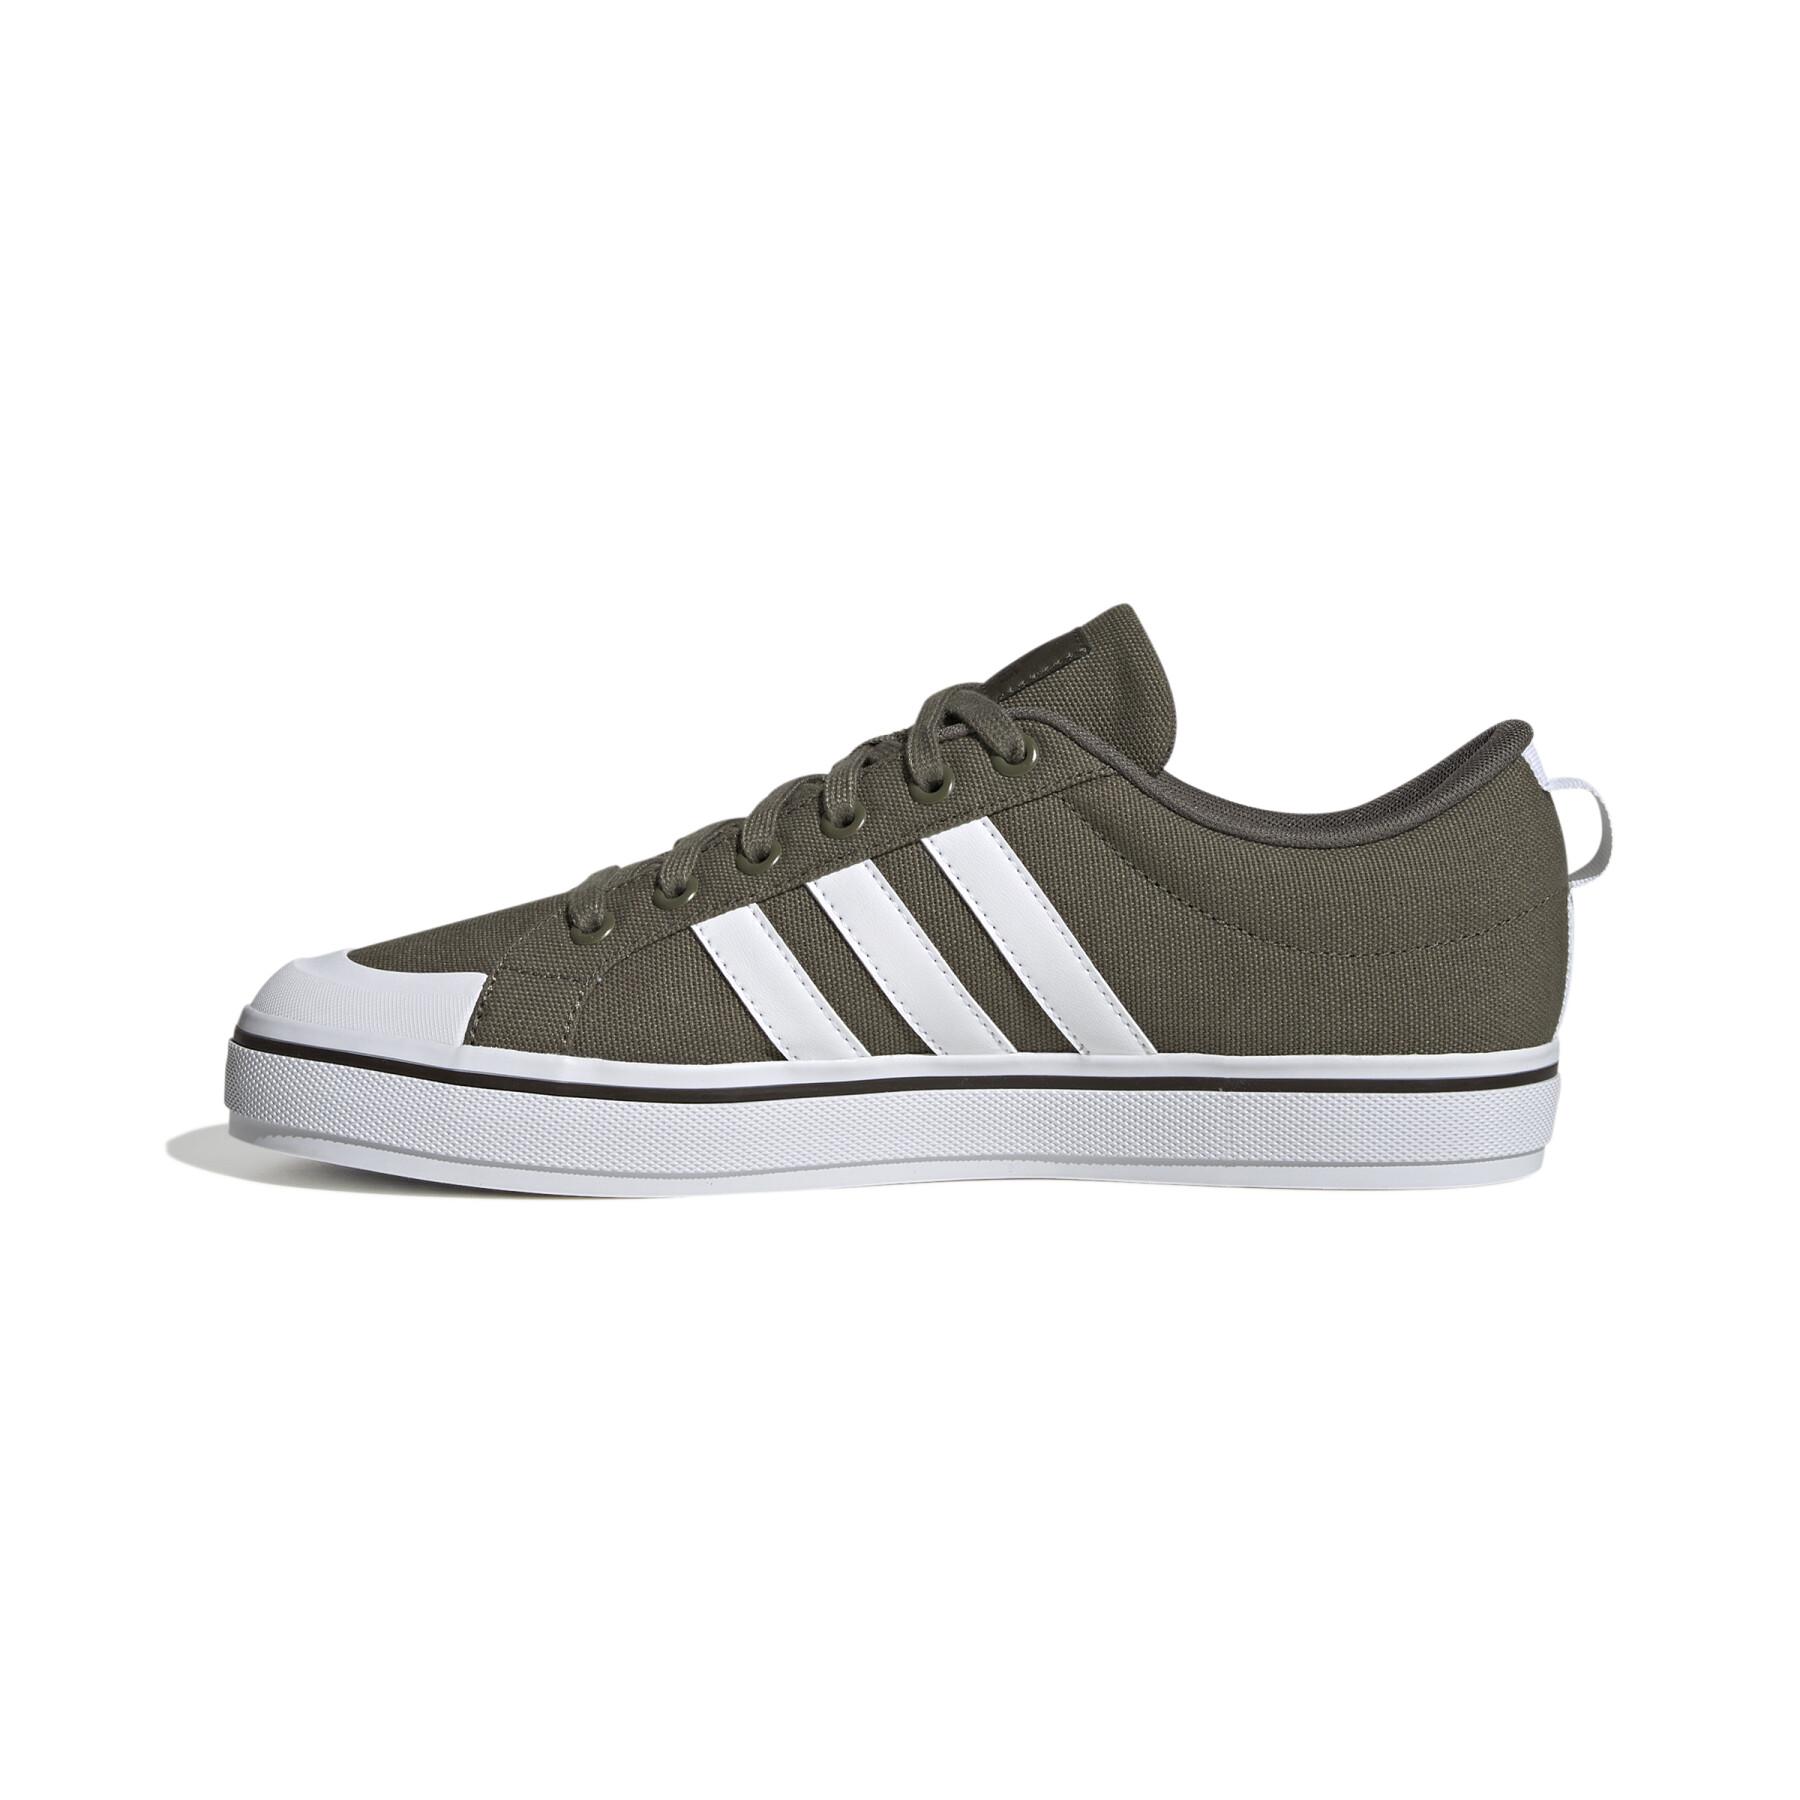 Trainers adidas Vl Court 2.0